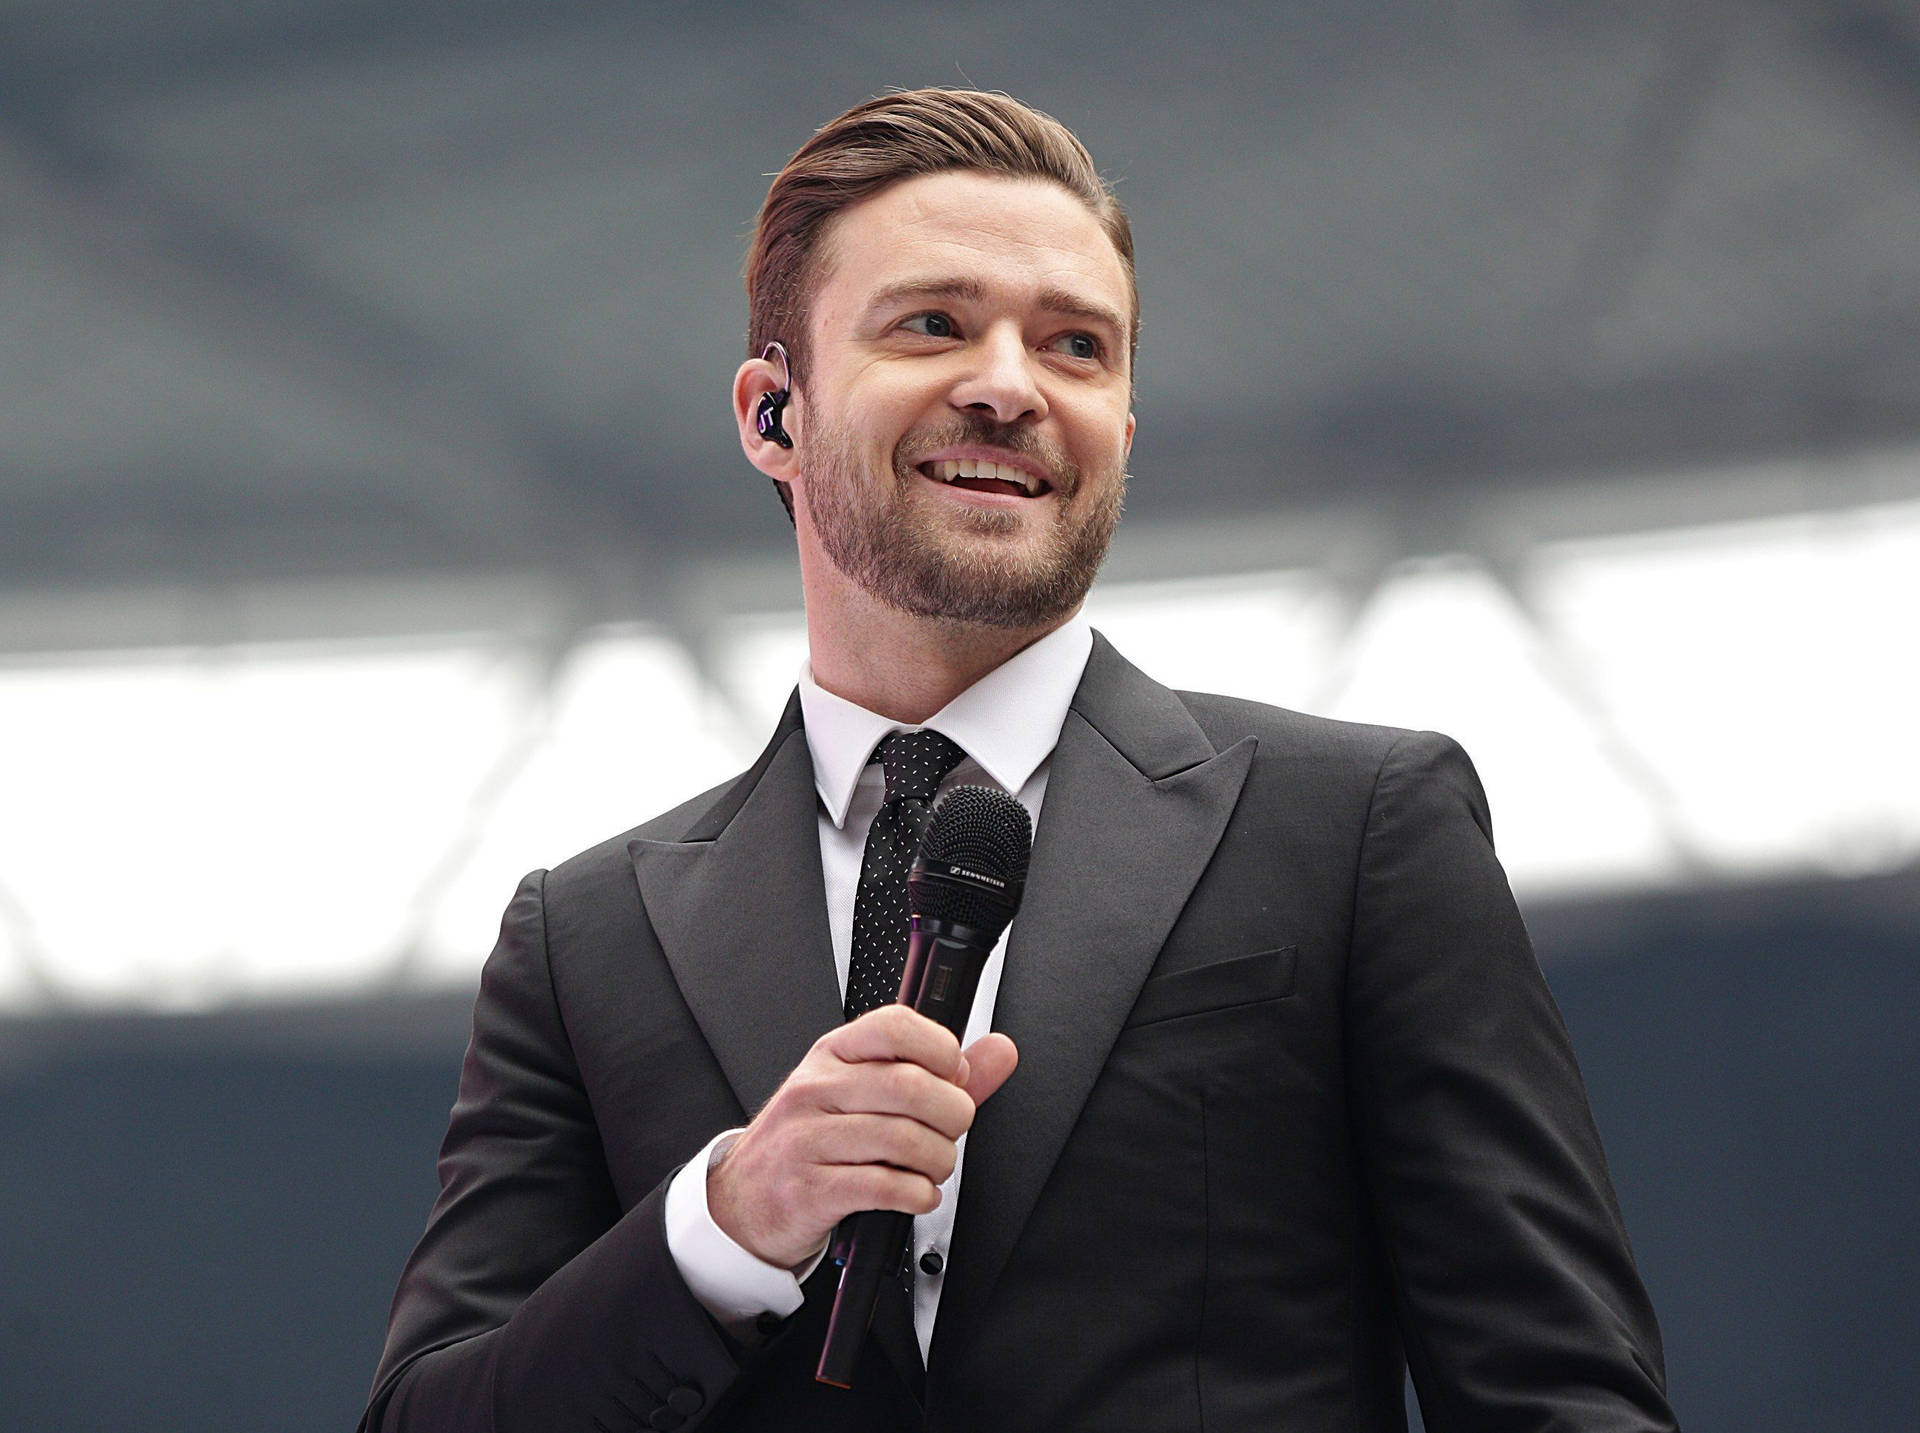 Justin Timberlake Suit And Tie Wallpaper